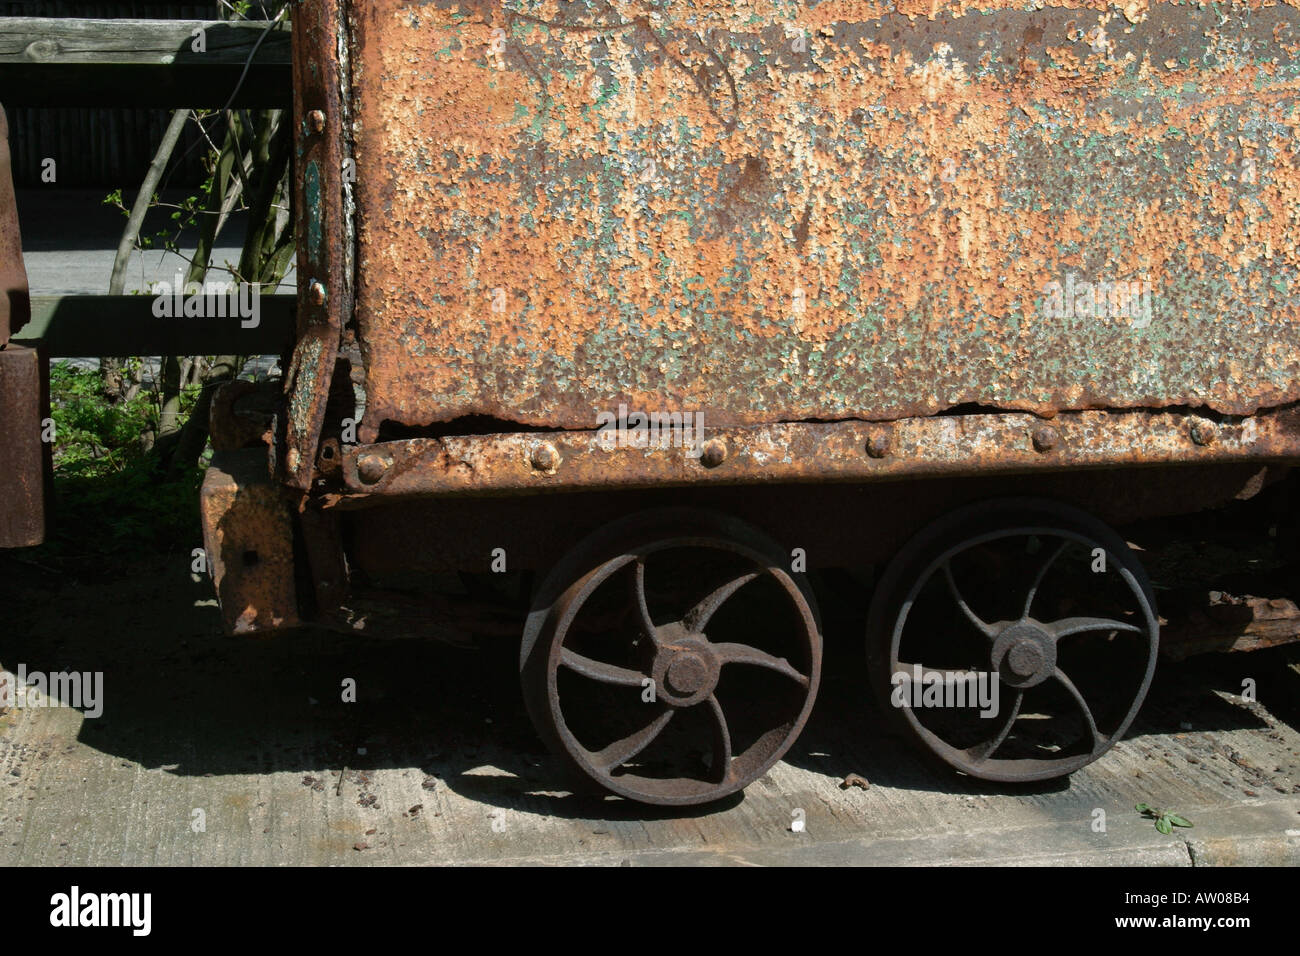 Close up of rusting coal wagon at NCM Body rusted through Rivets and cast iron wheels clearly visible Stock Photo